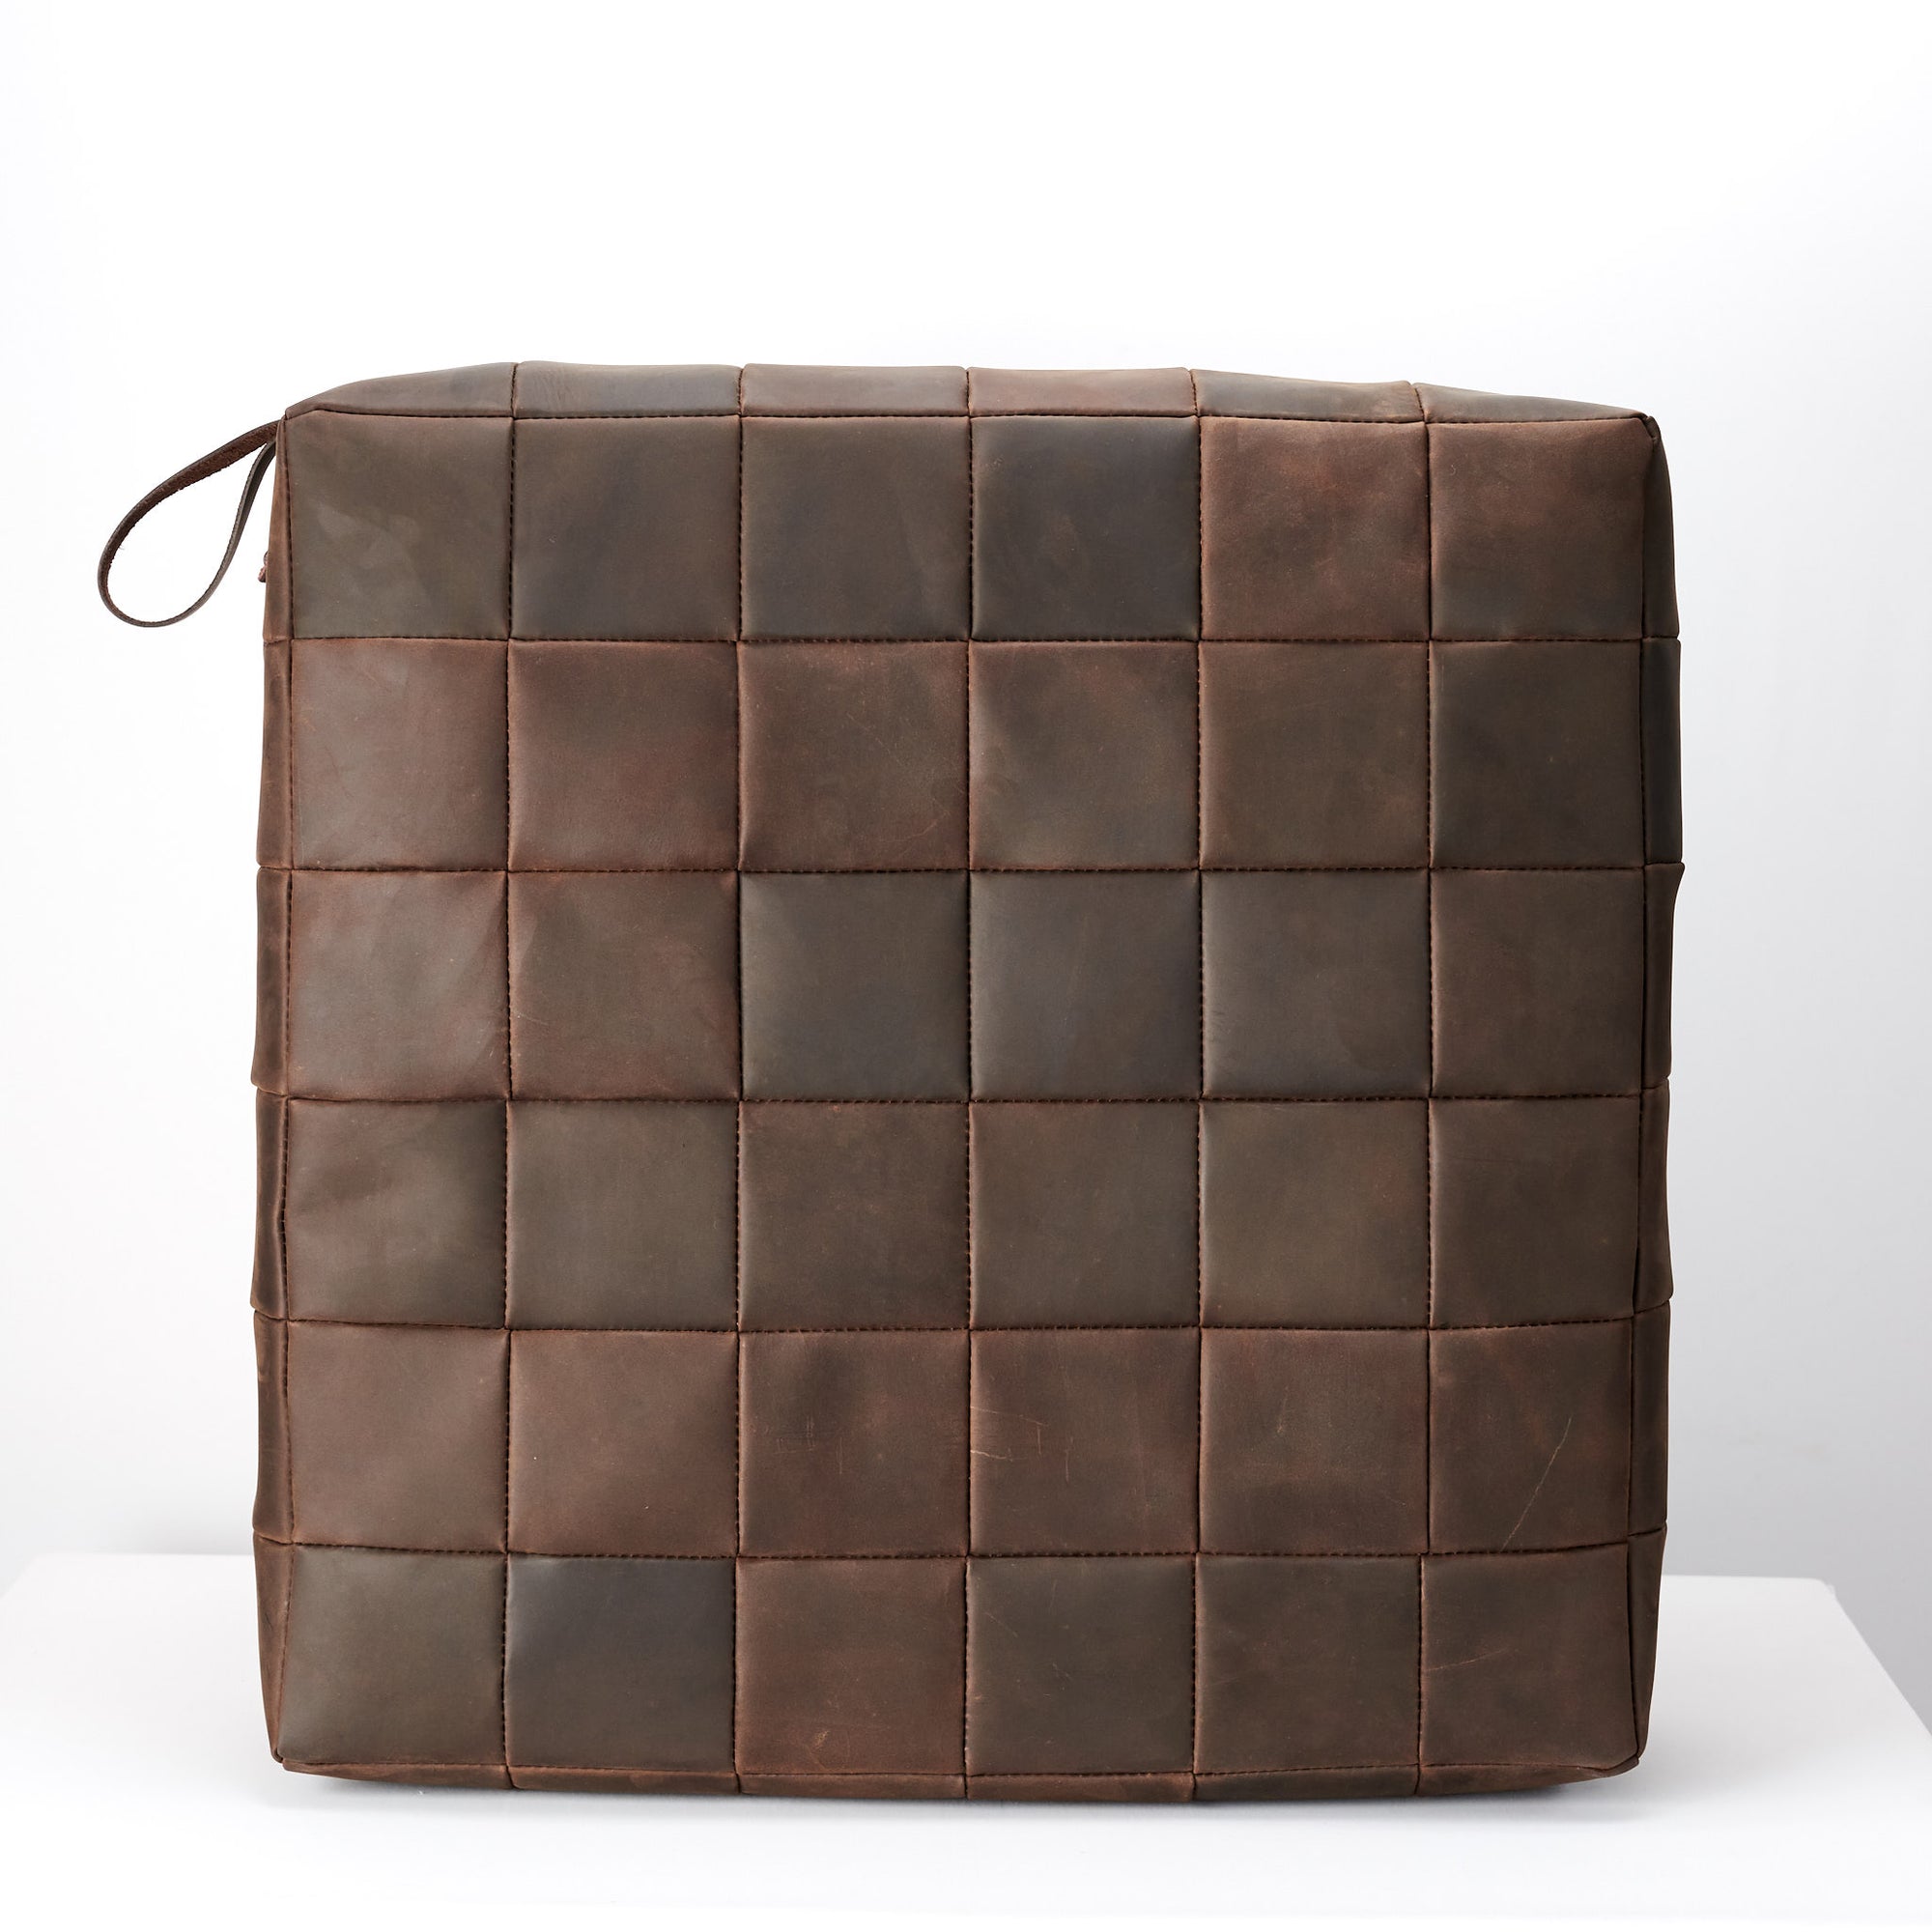 Brown Leather floor cushion pillow for home furniture.